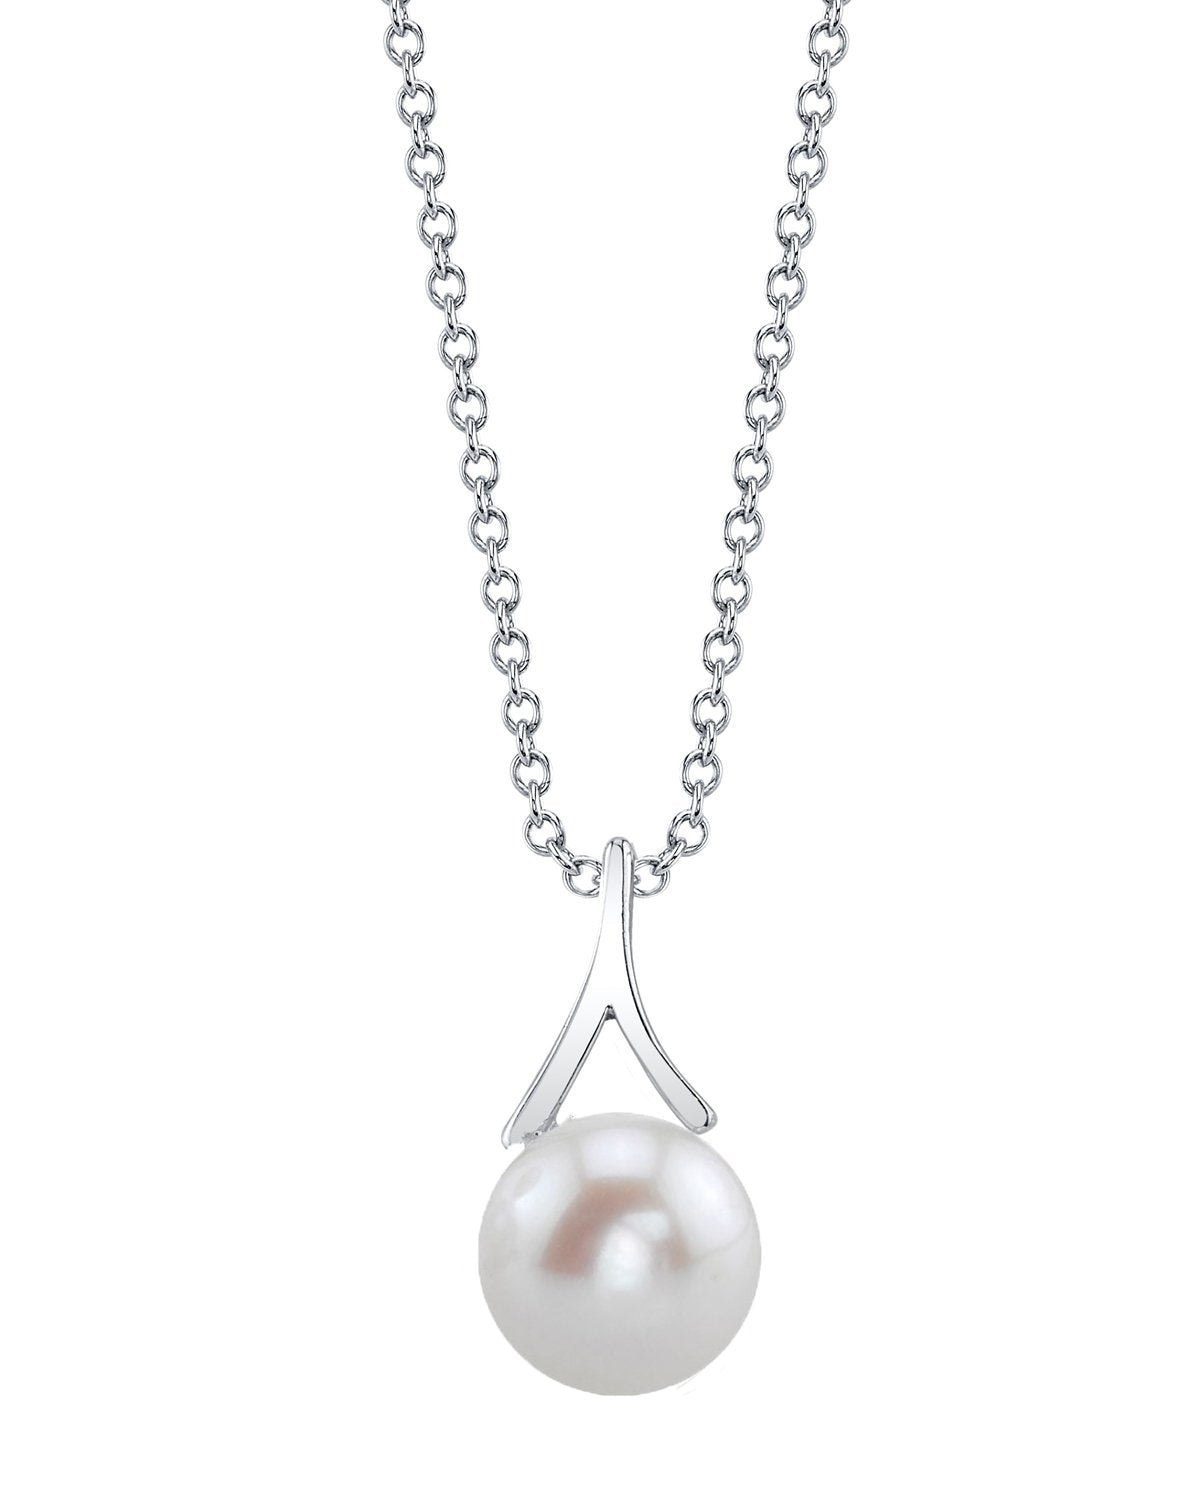 Single Pearl Choker Necklace | Sterling Silver Chain | Adjustable Length |  Certified Quality – Witt & Pearl